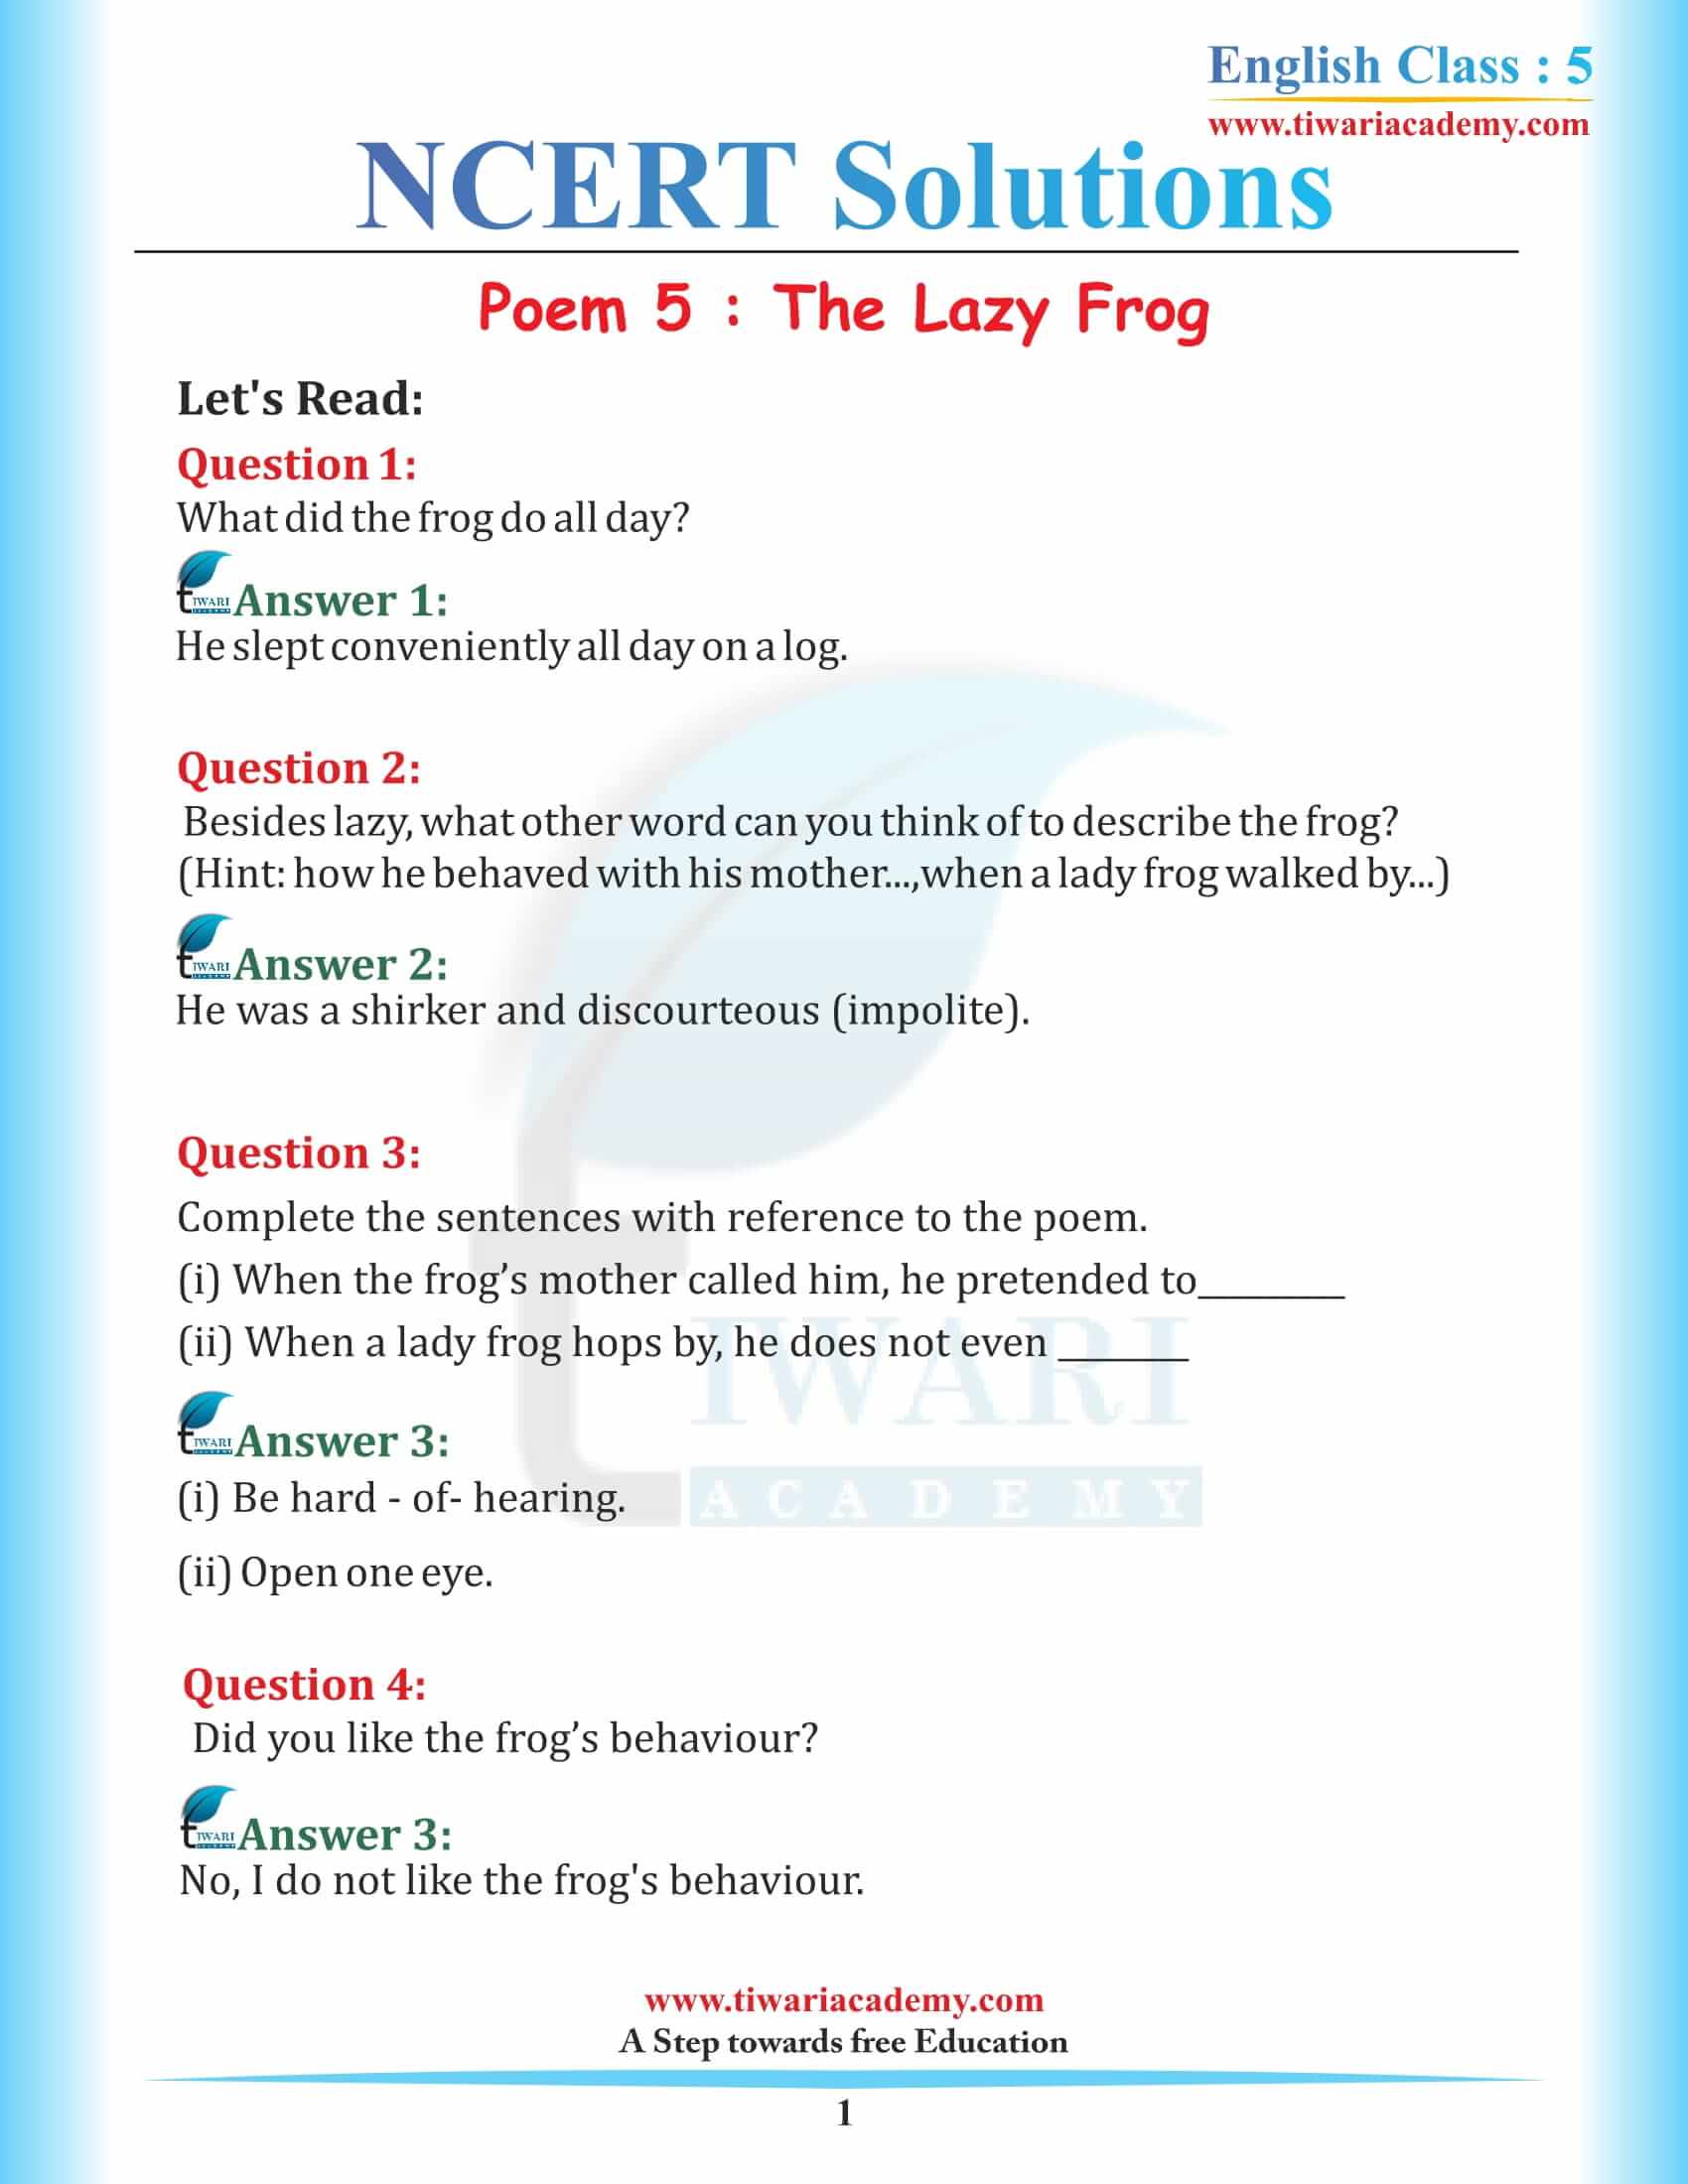 NCERT Solutions for Class 5 English Chapter 5 The Lazy Frog